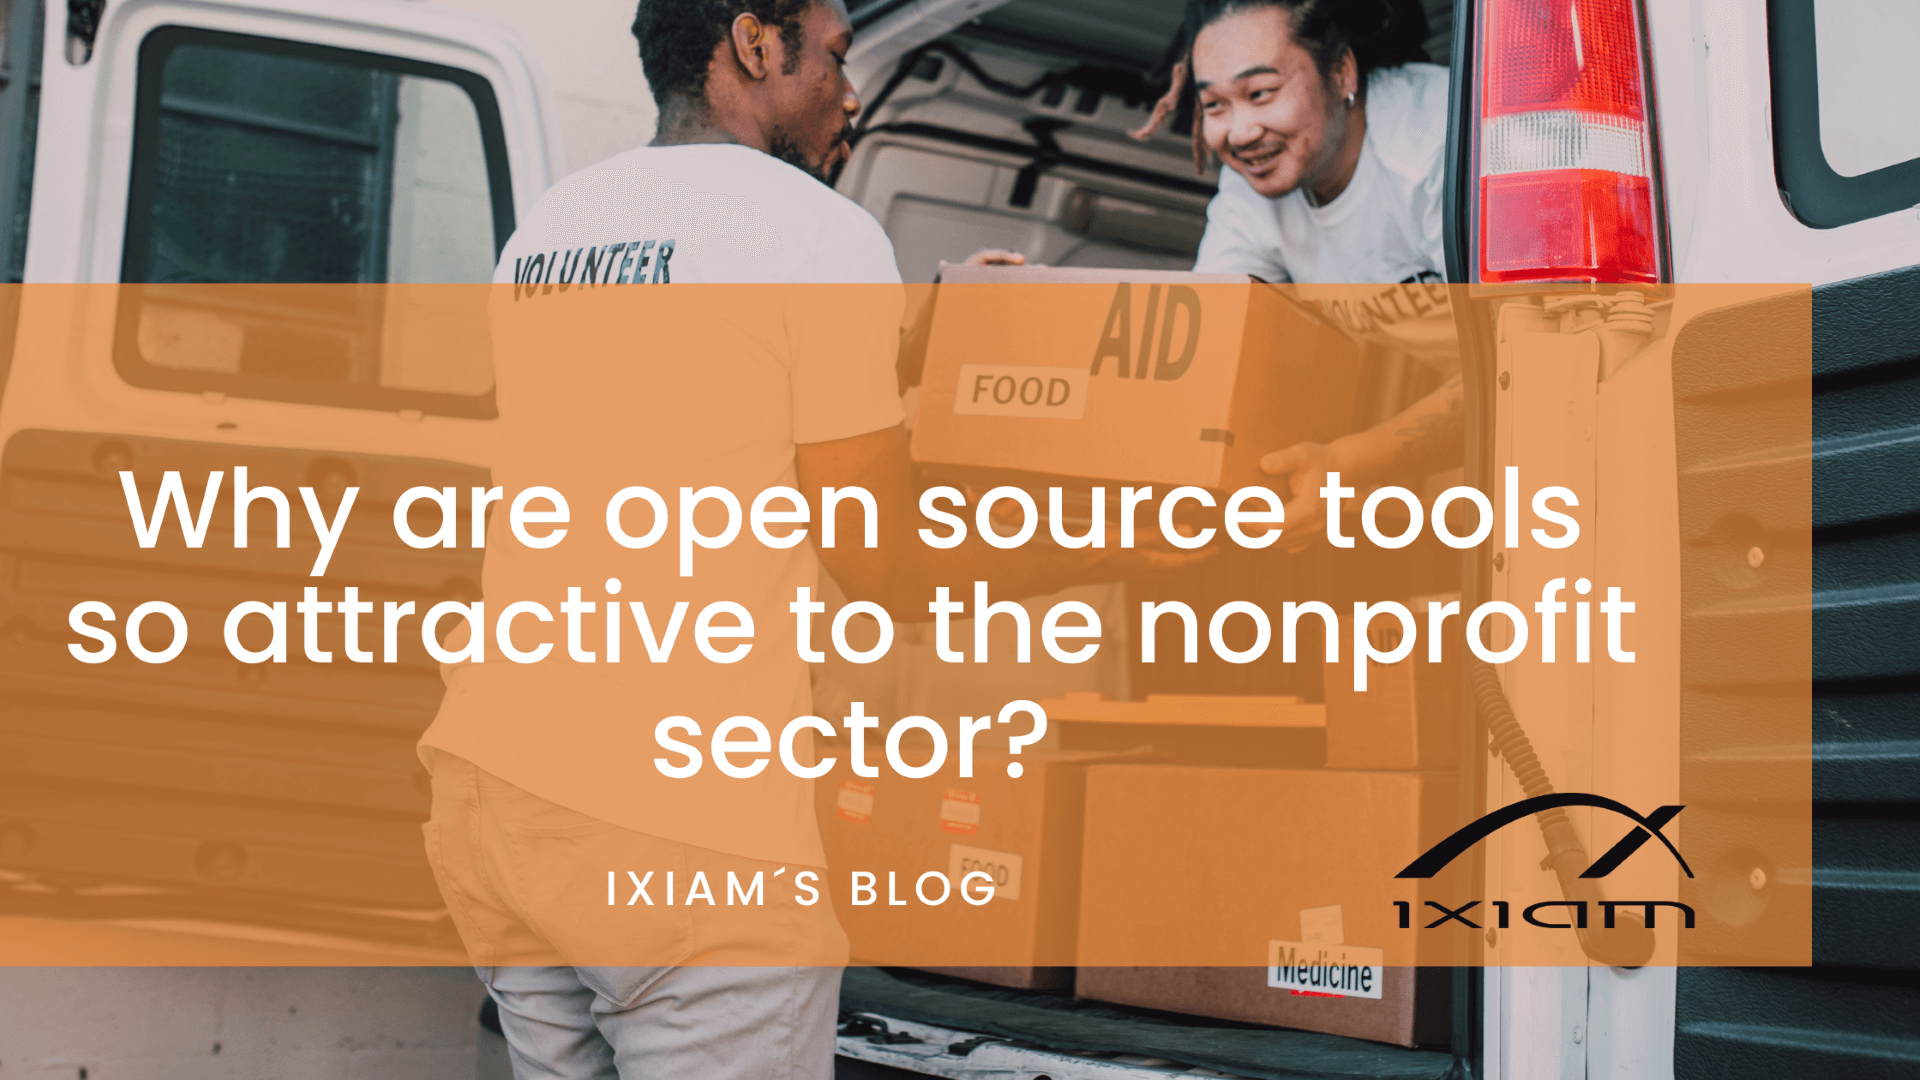 Open source tools provide great benefits to nonprofit organizations For this reason ixiam global solutions champions this technology